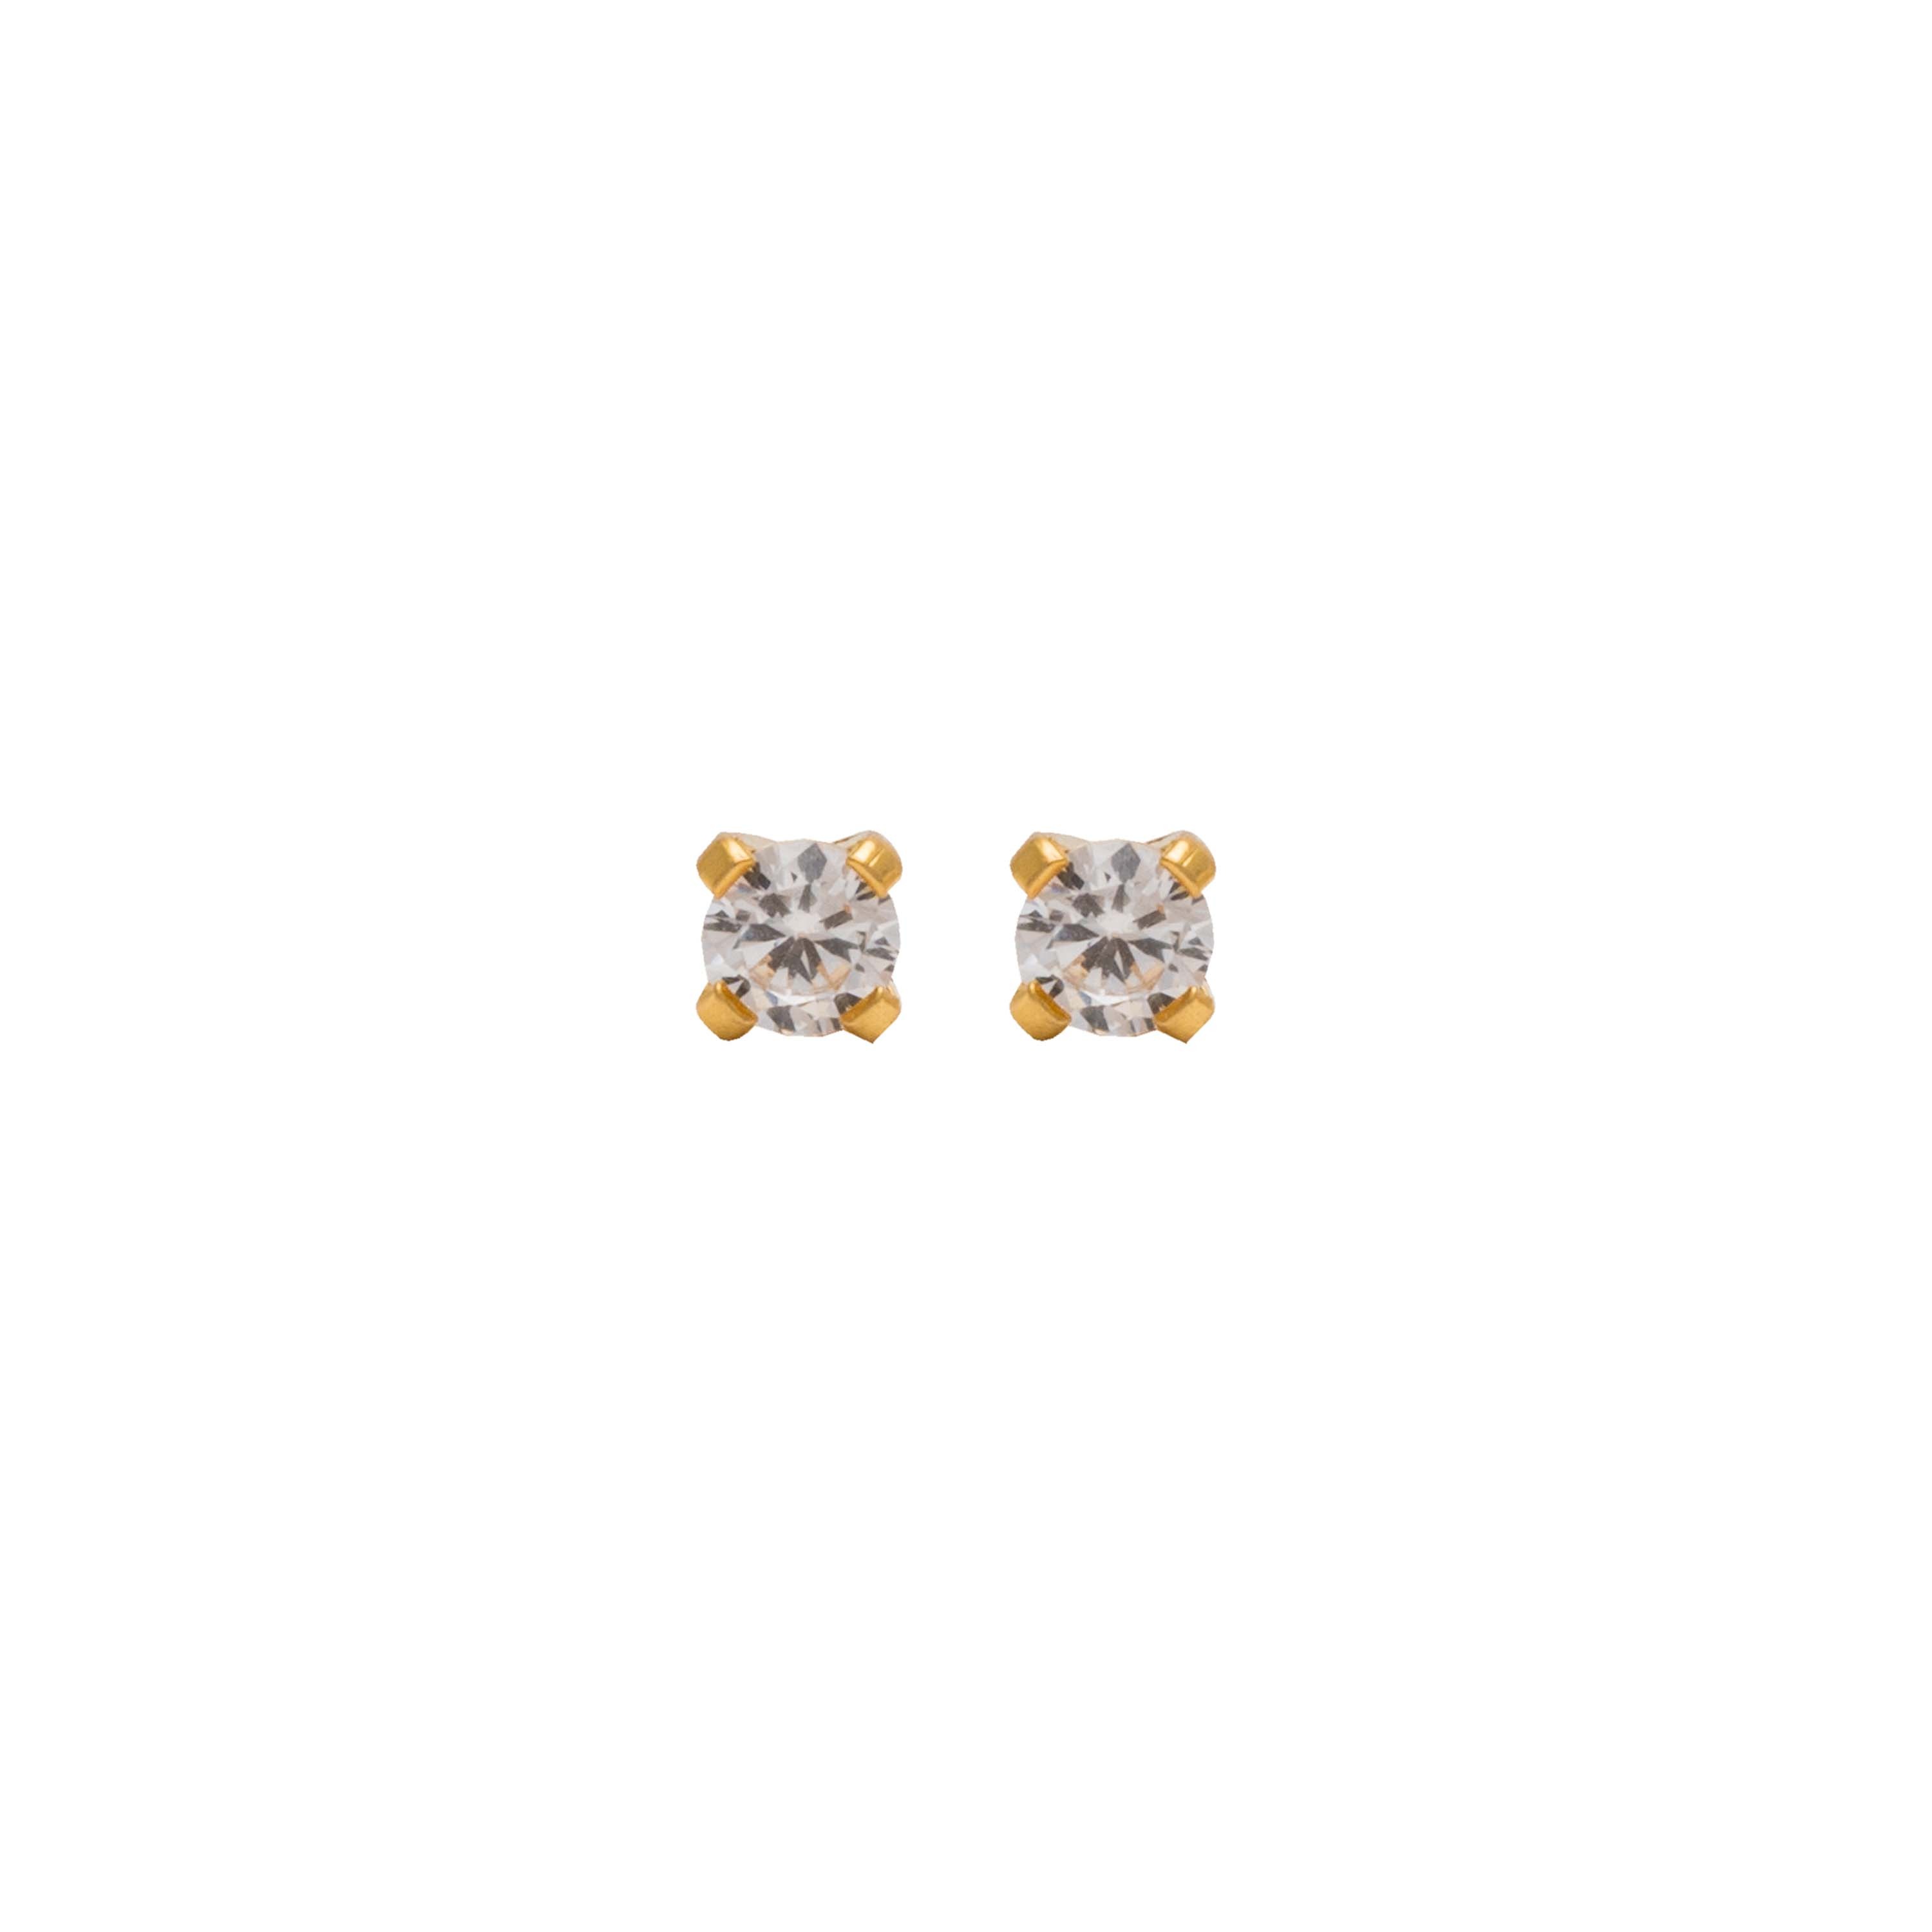 3MM - Cubic Zirconia (Round) - Crystal Clear | 24K Gold Plated Simple Yet Stylish, Cute & Trending Fashion Earrings / Ear Studs for Girls & Women Online @ Pakistan | Studex Sensitive (for daily wear)